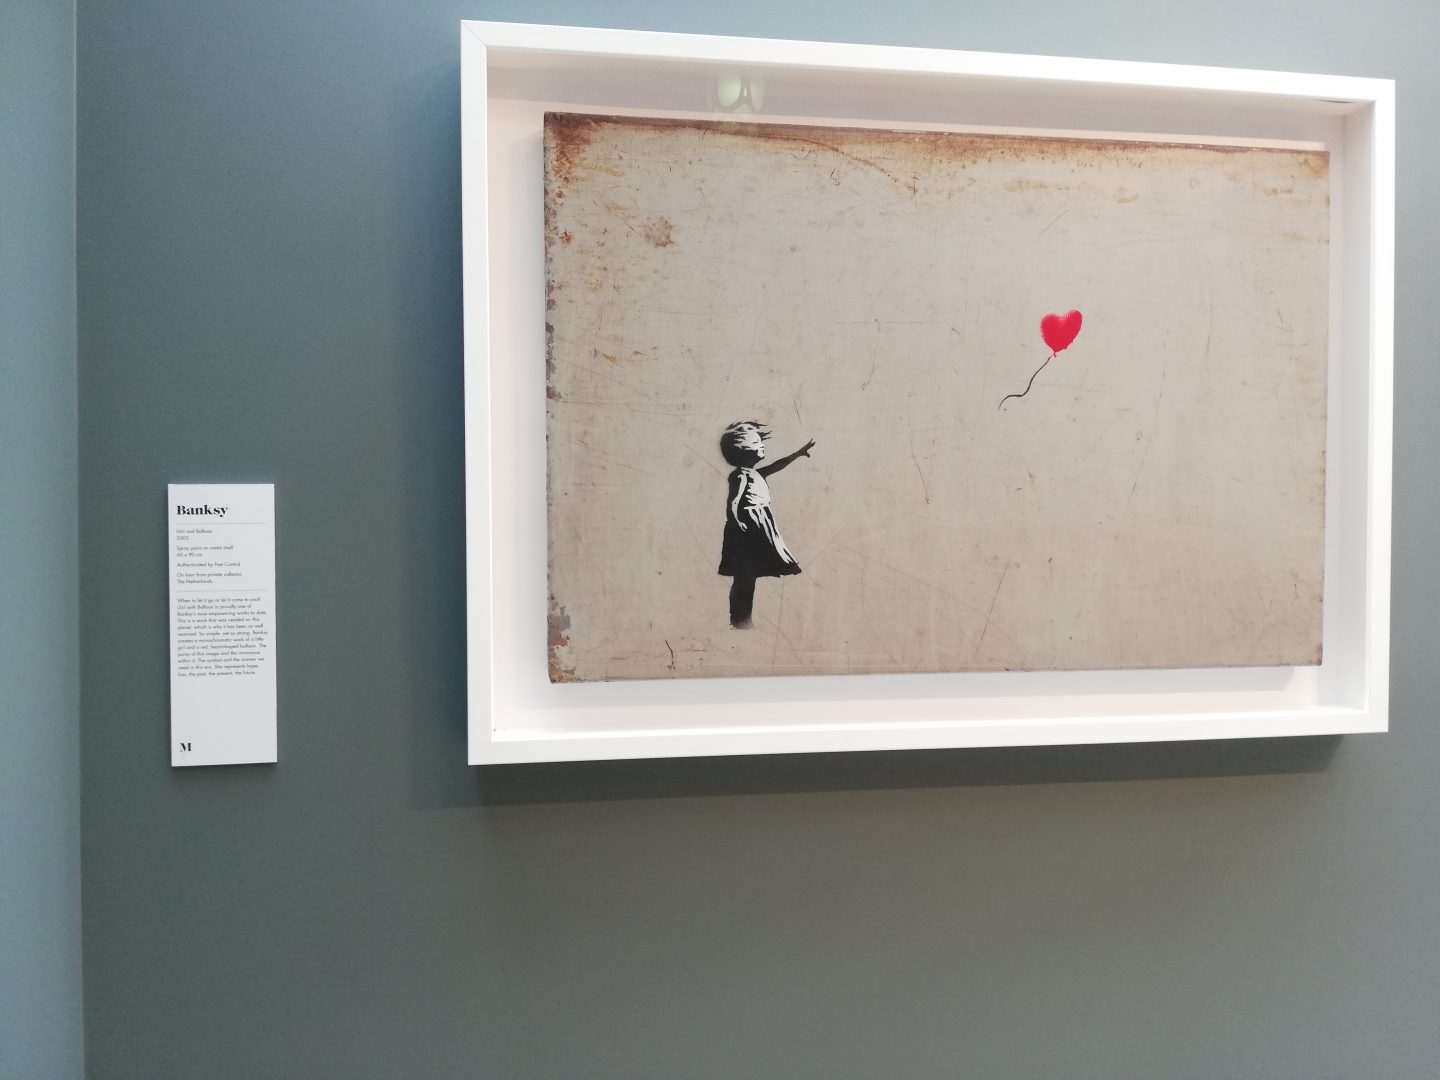 Girl and Balloon by Banksy